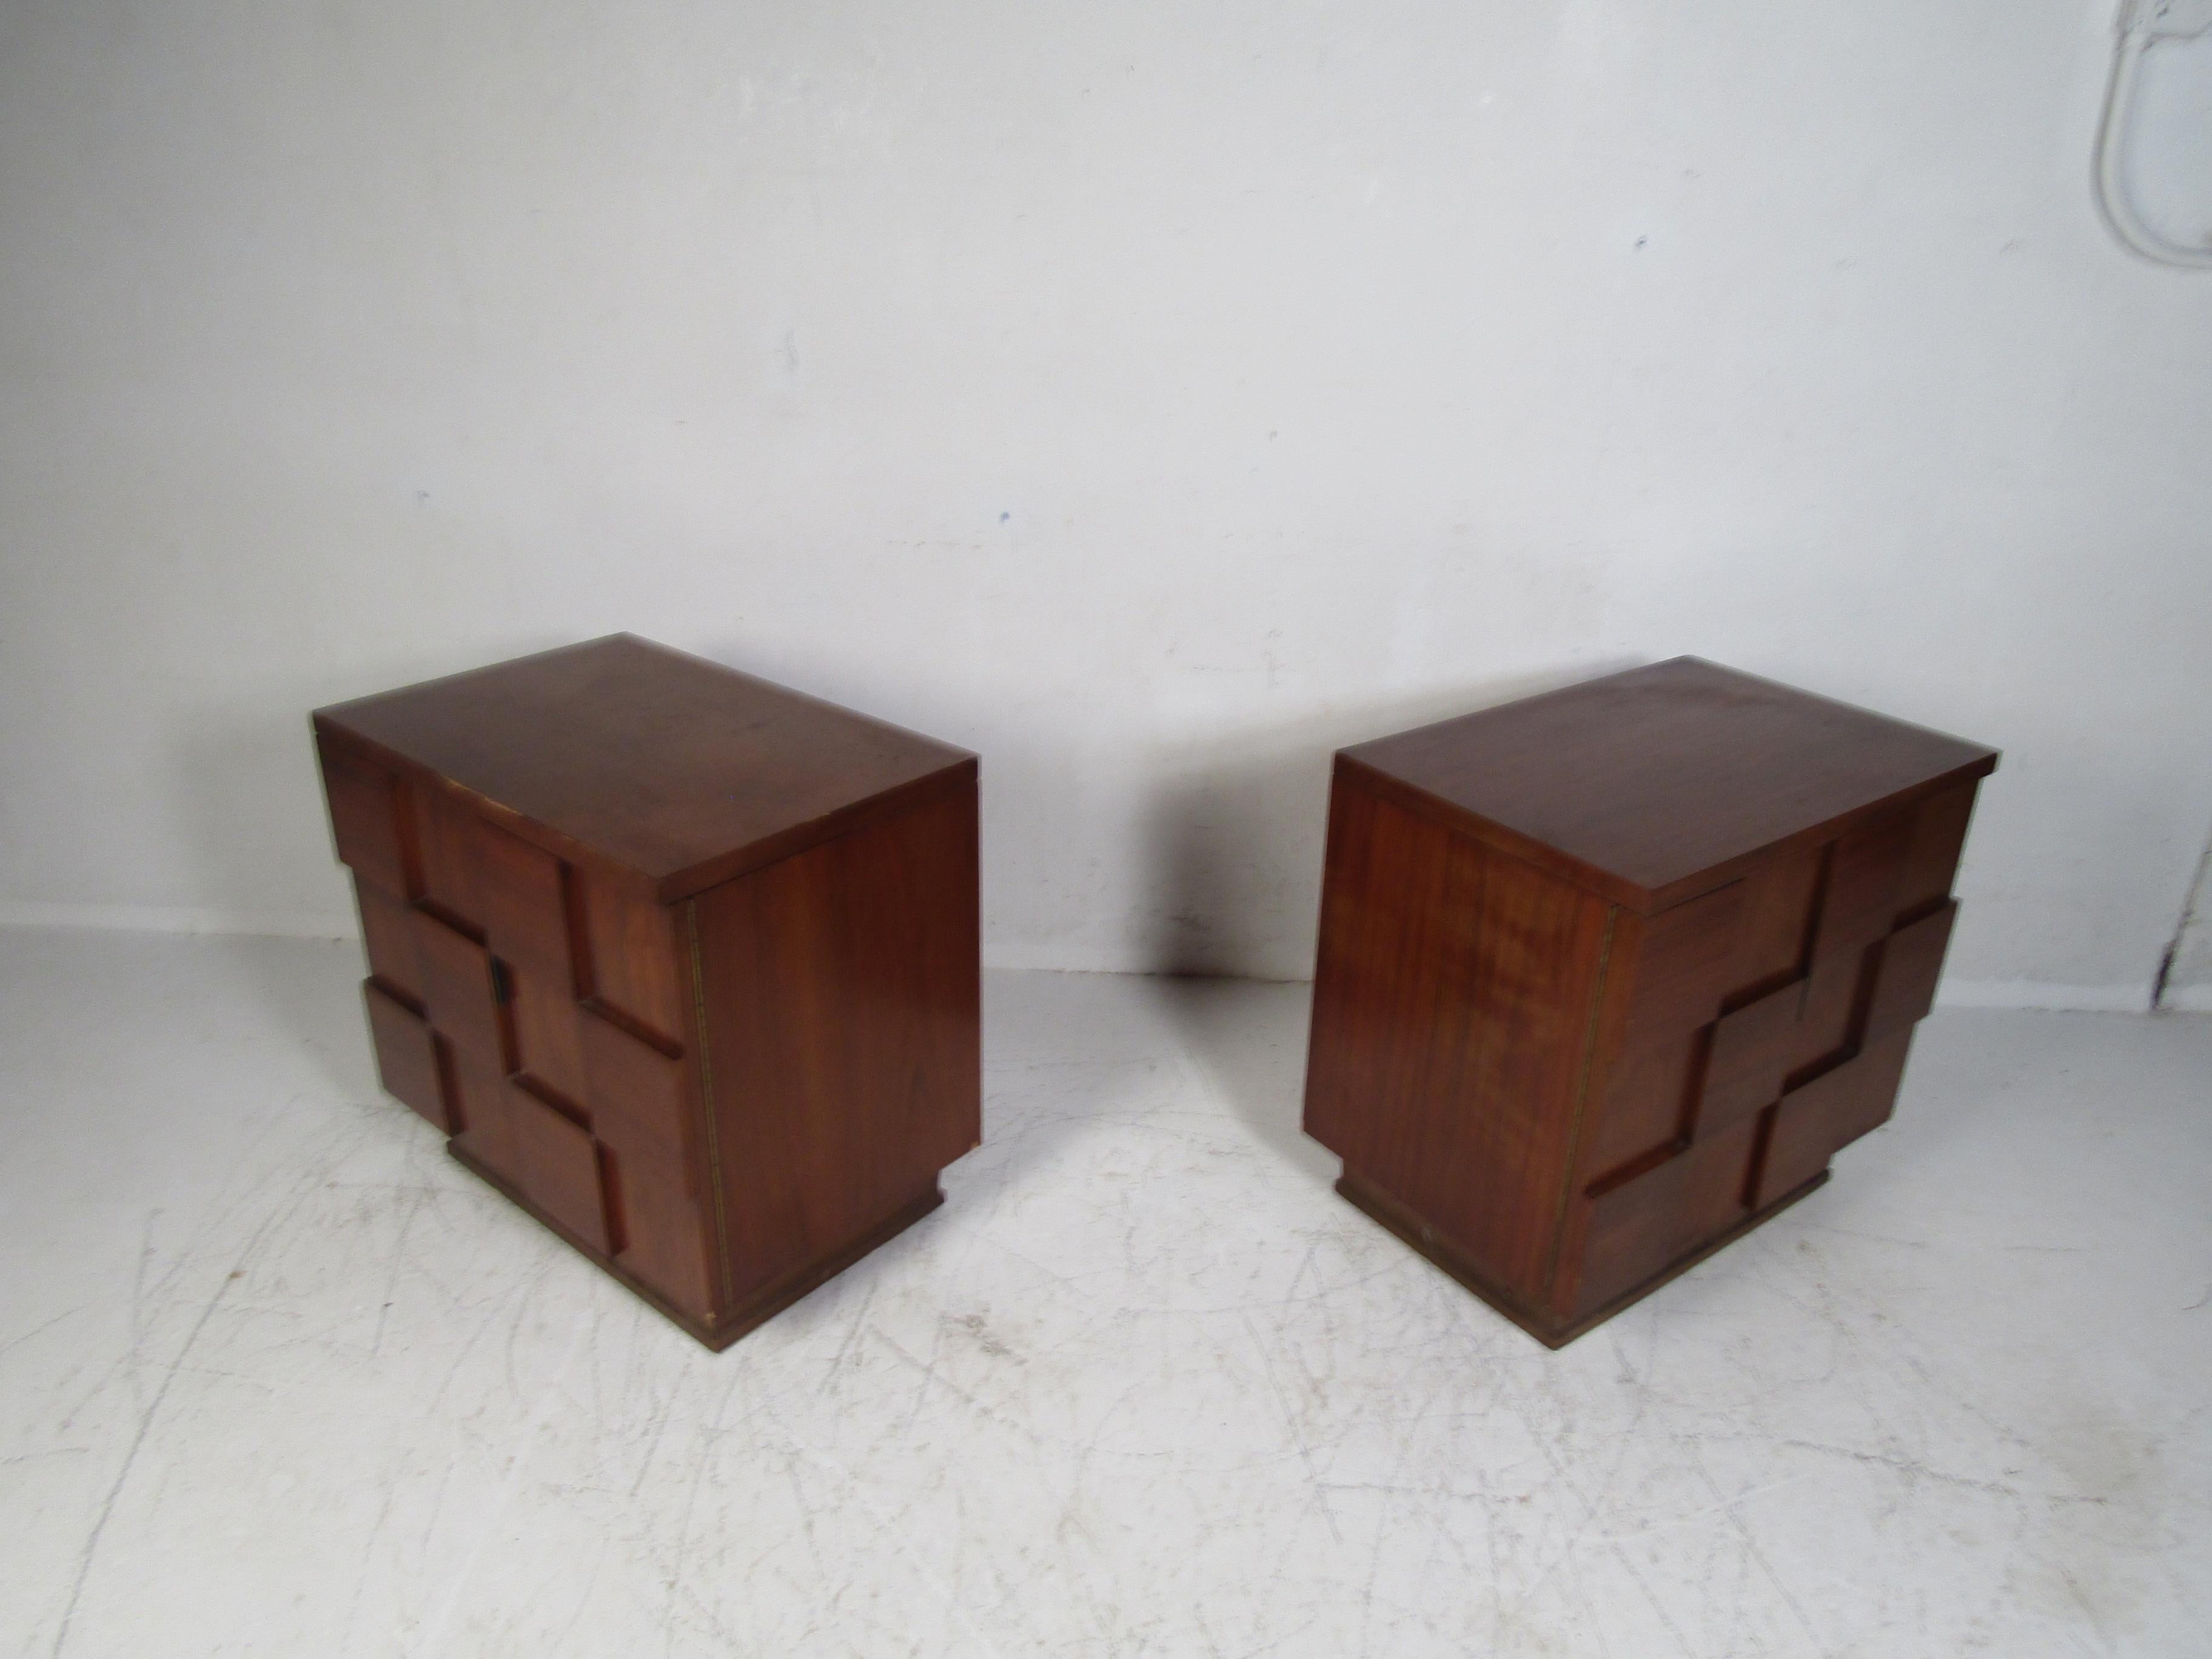 American Pair of Midcentury Brutalist Style Nightstands by Young Manufacturing Co.